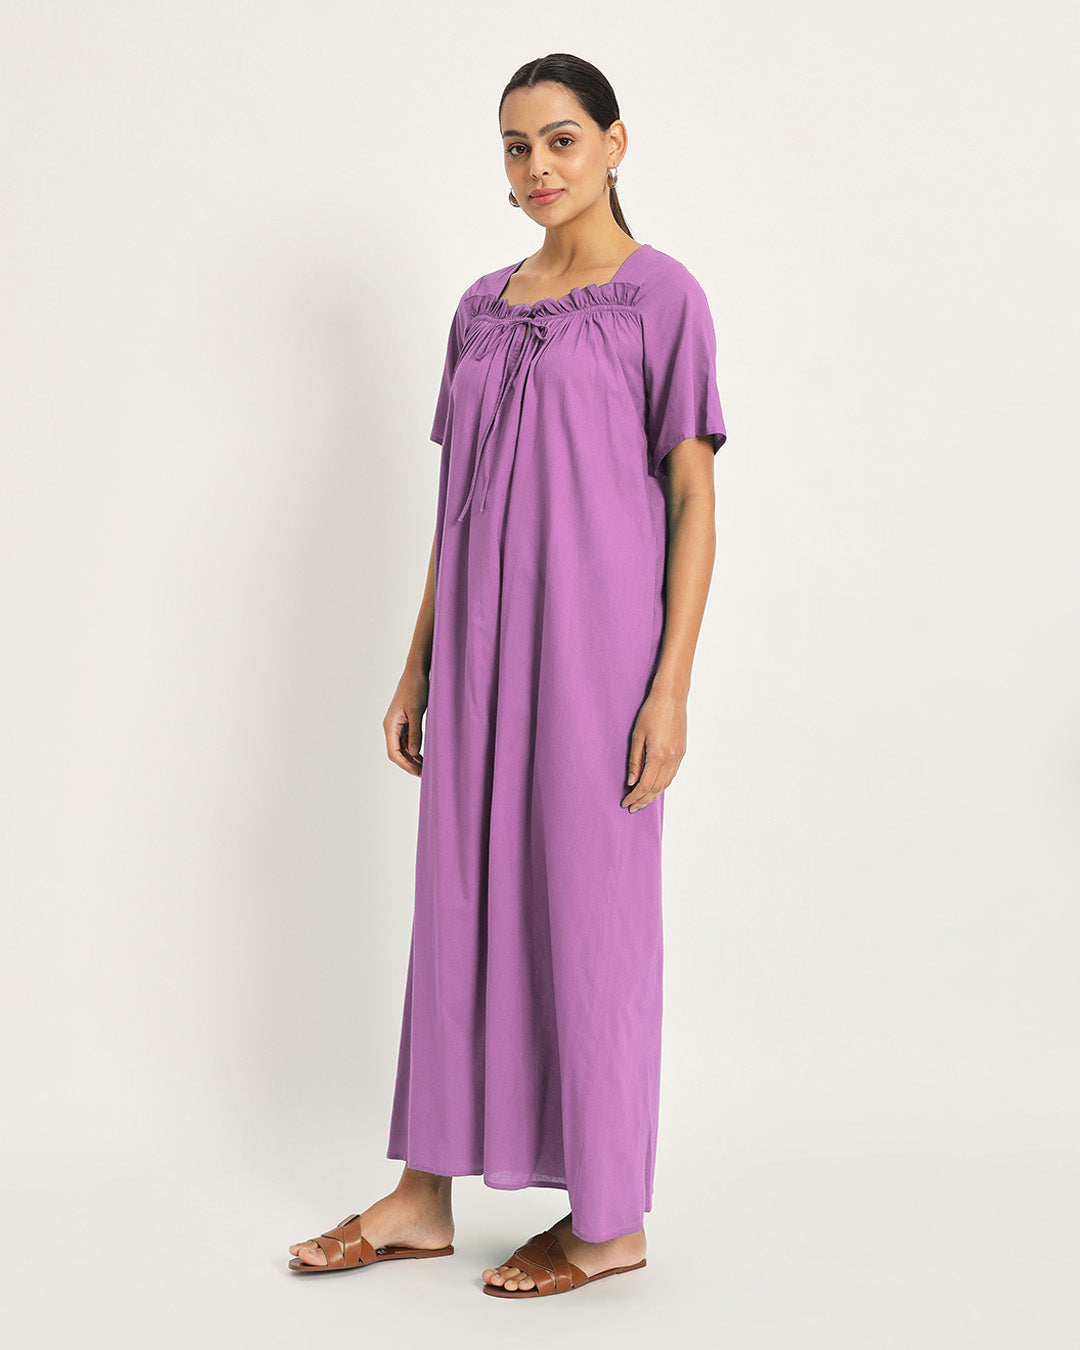 Combo: Classic Black & Wisteria Purple Breathable Bliss Nightdress